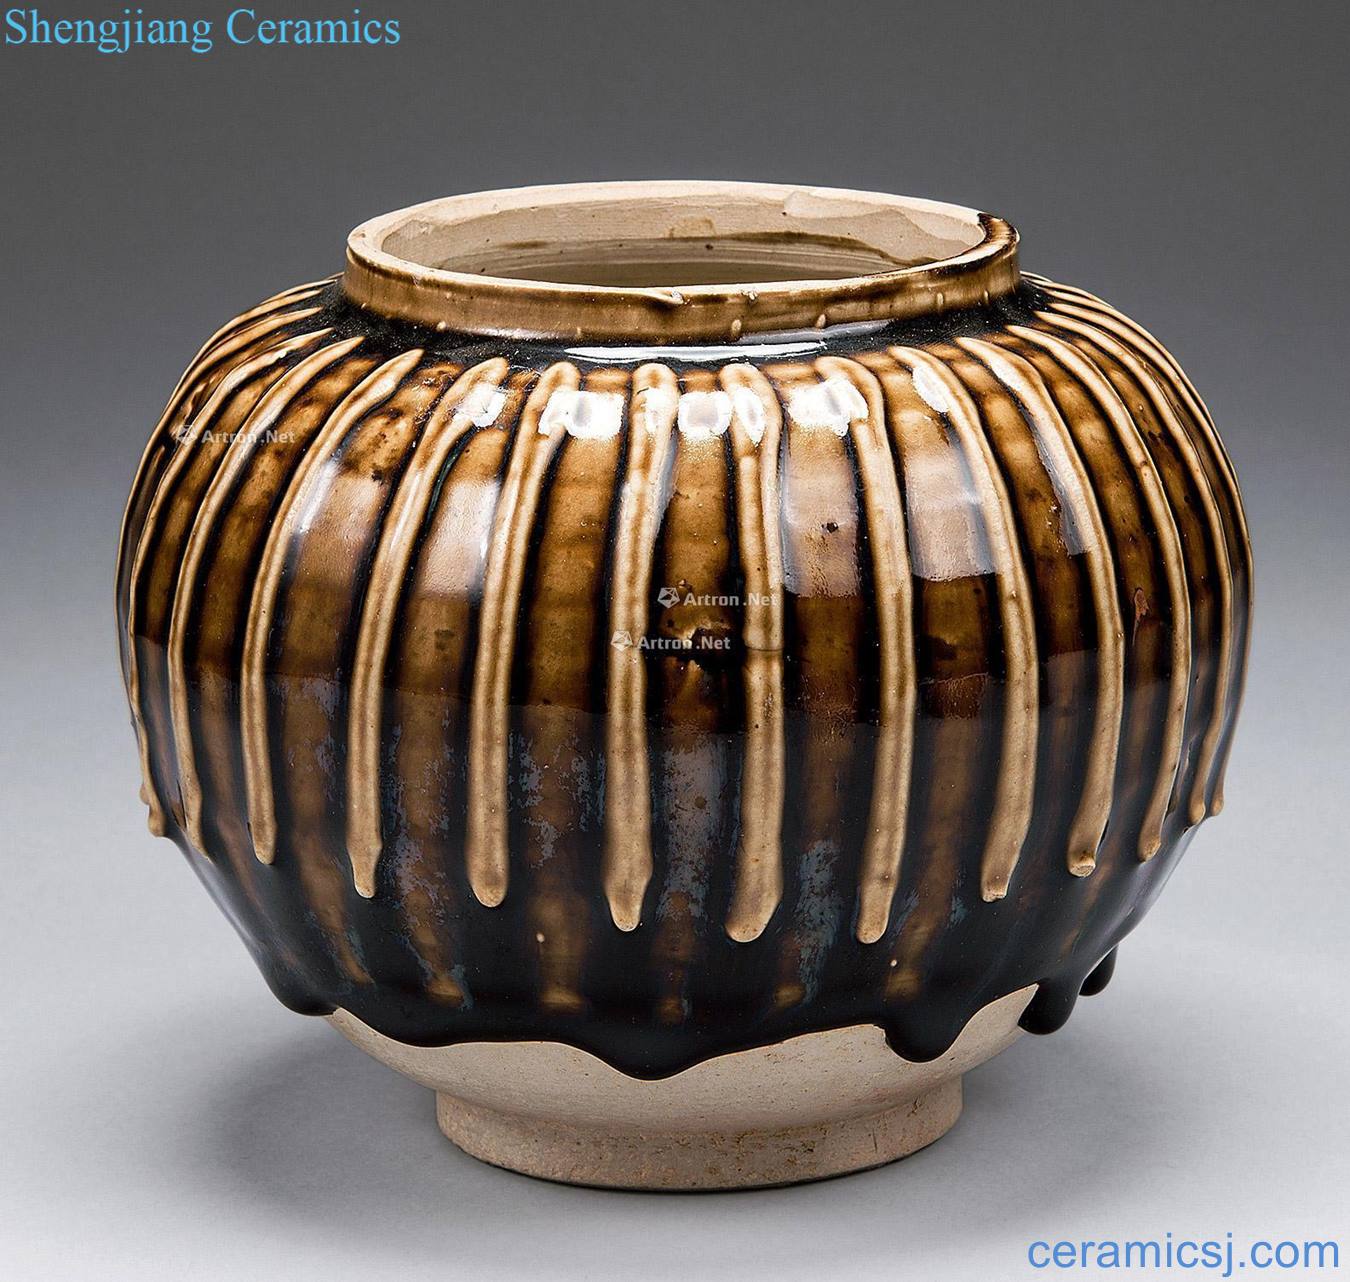 The song dynasty Henan red glaze line cans